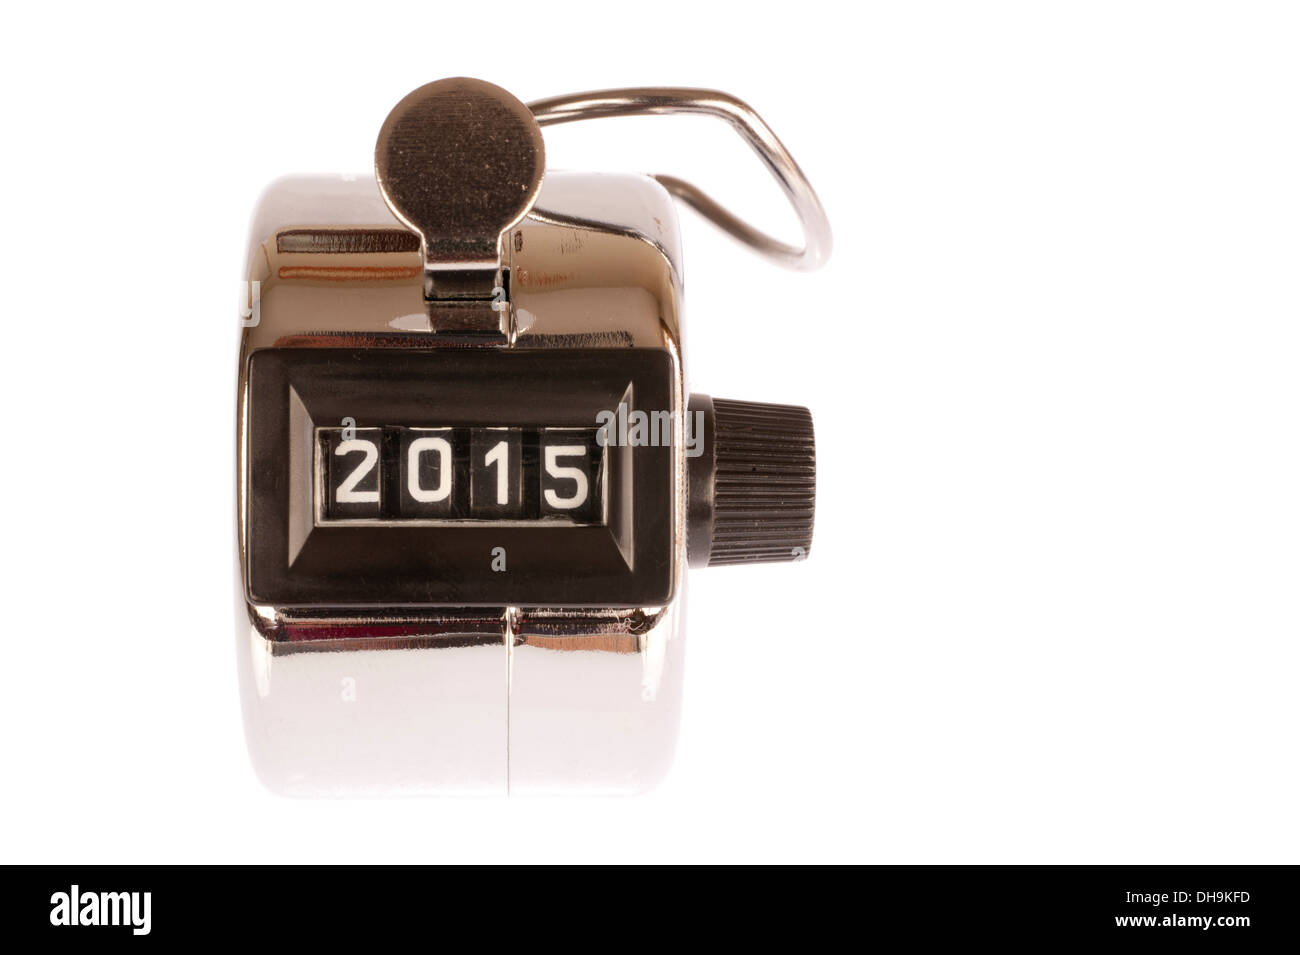 Chrome analog pedometer with is counter set at the year 2015 Stock Photo